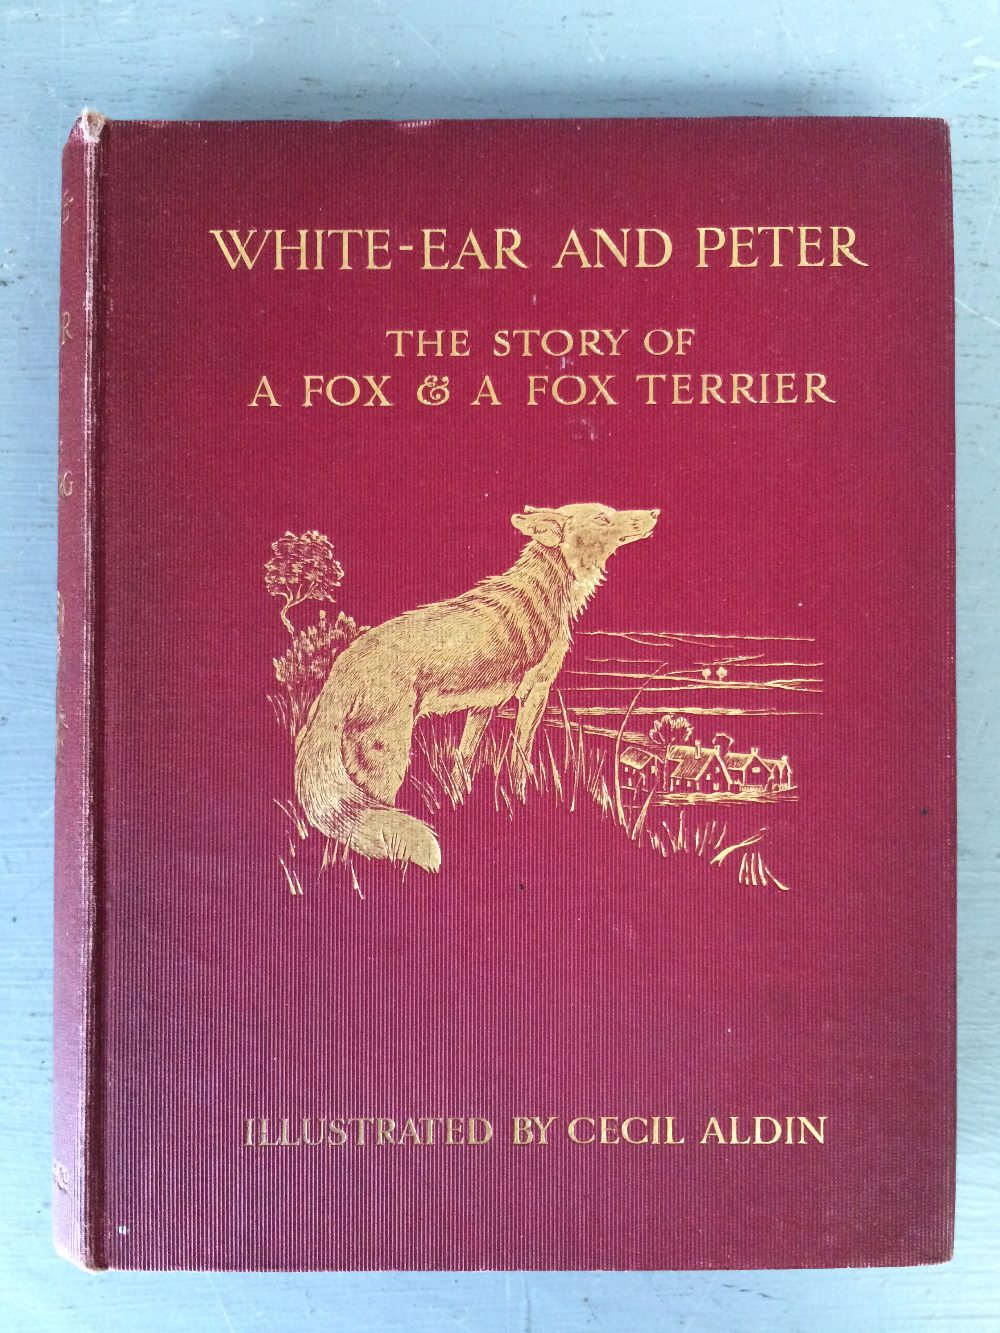 NEILS HEIBERG 'White Ear & Peter' 1st edition London 1912 Macmillan & Co bound in burgundy cloth &